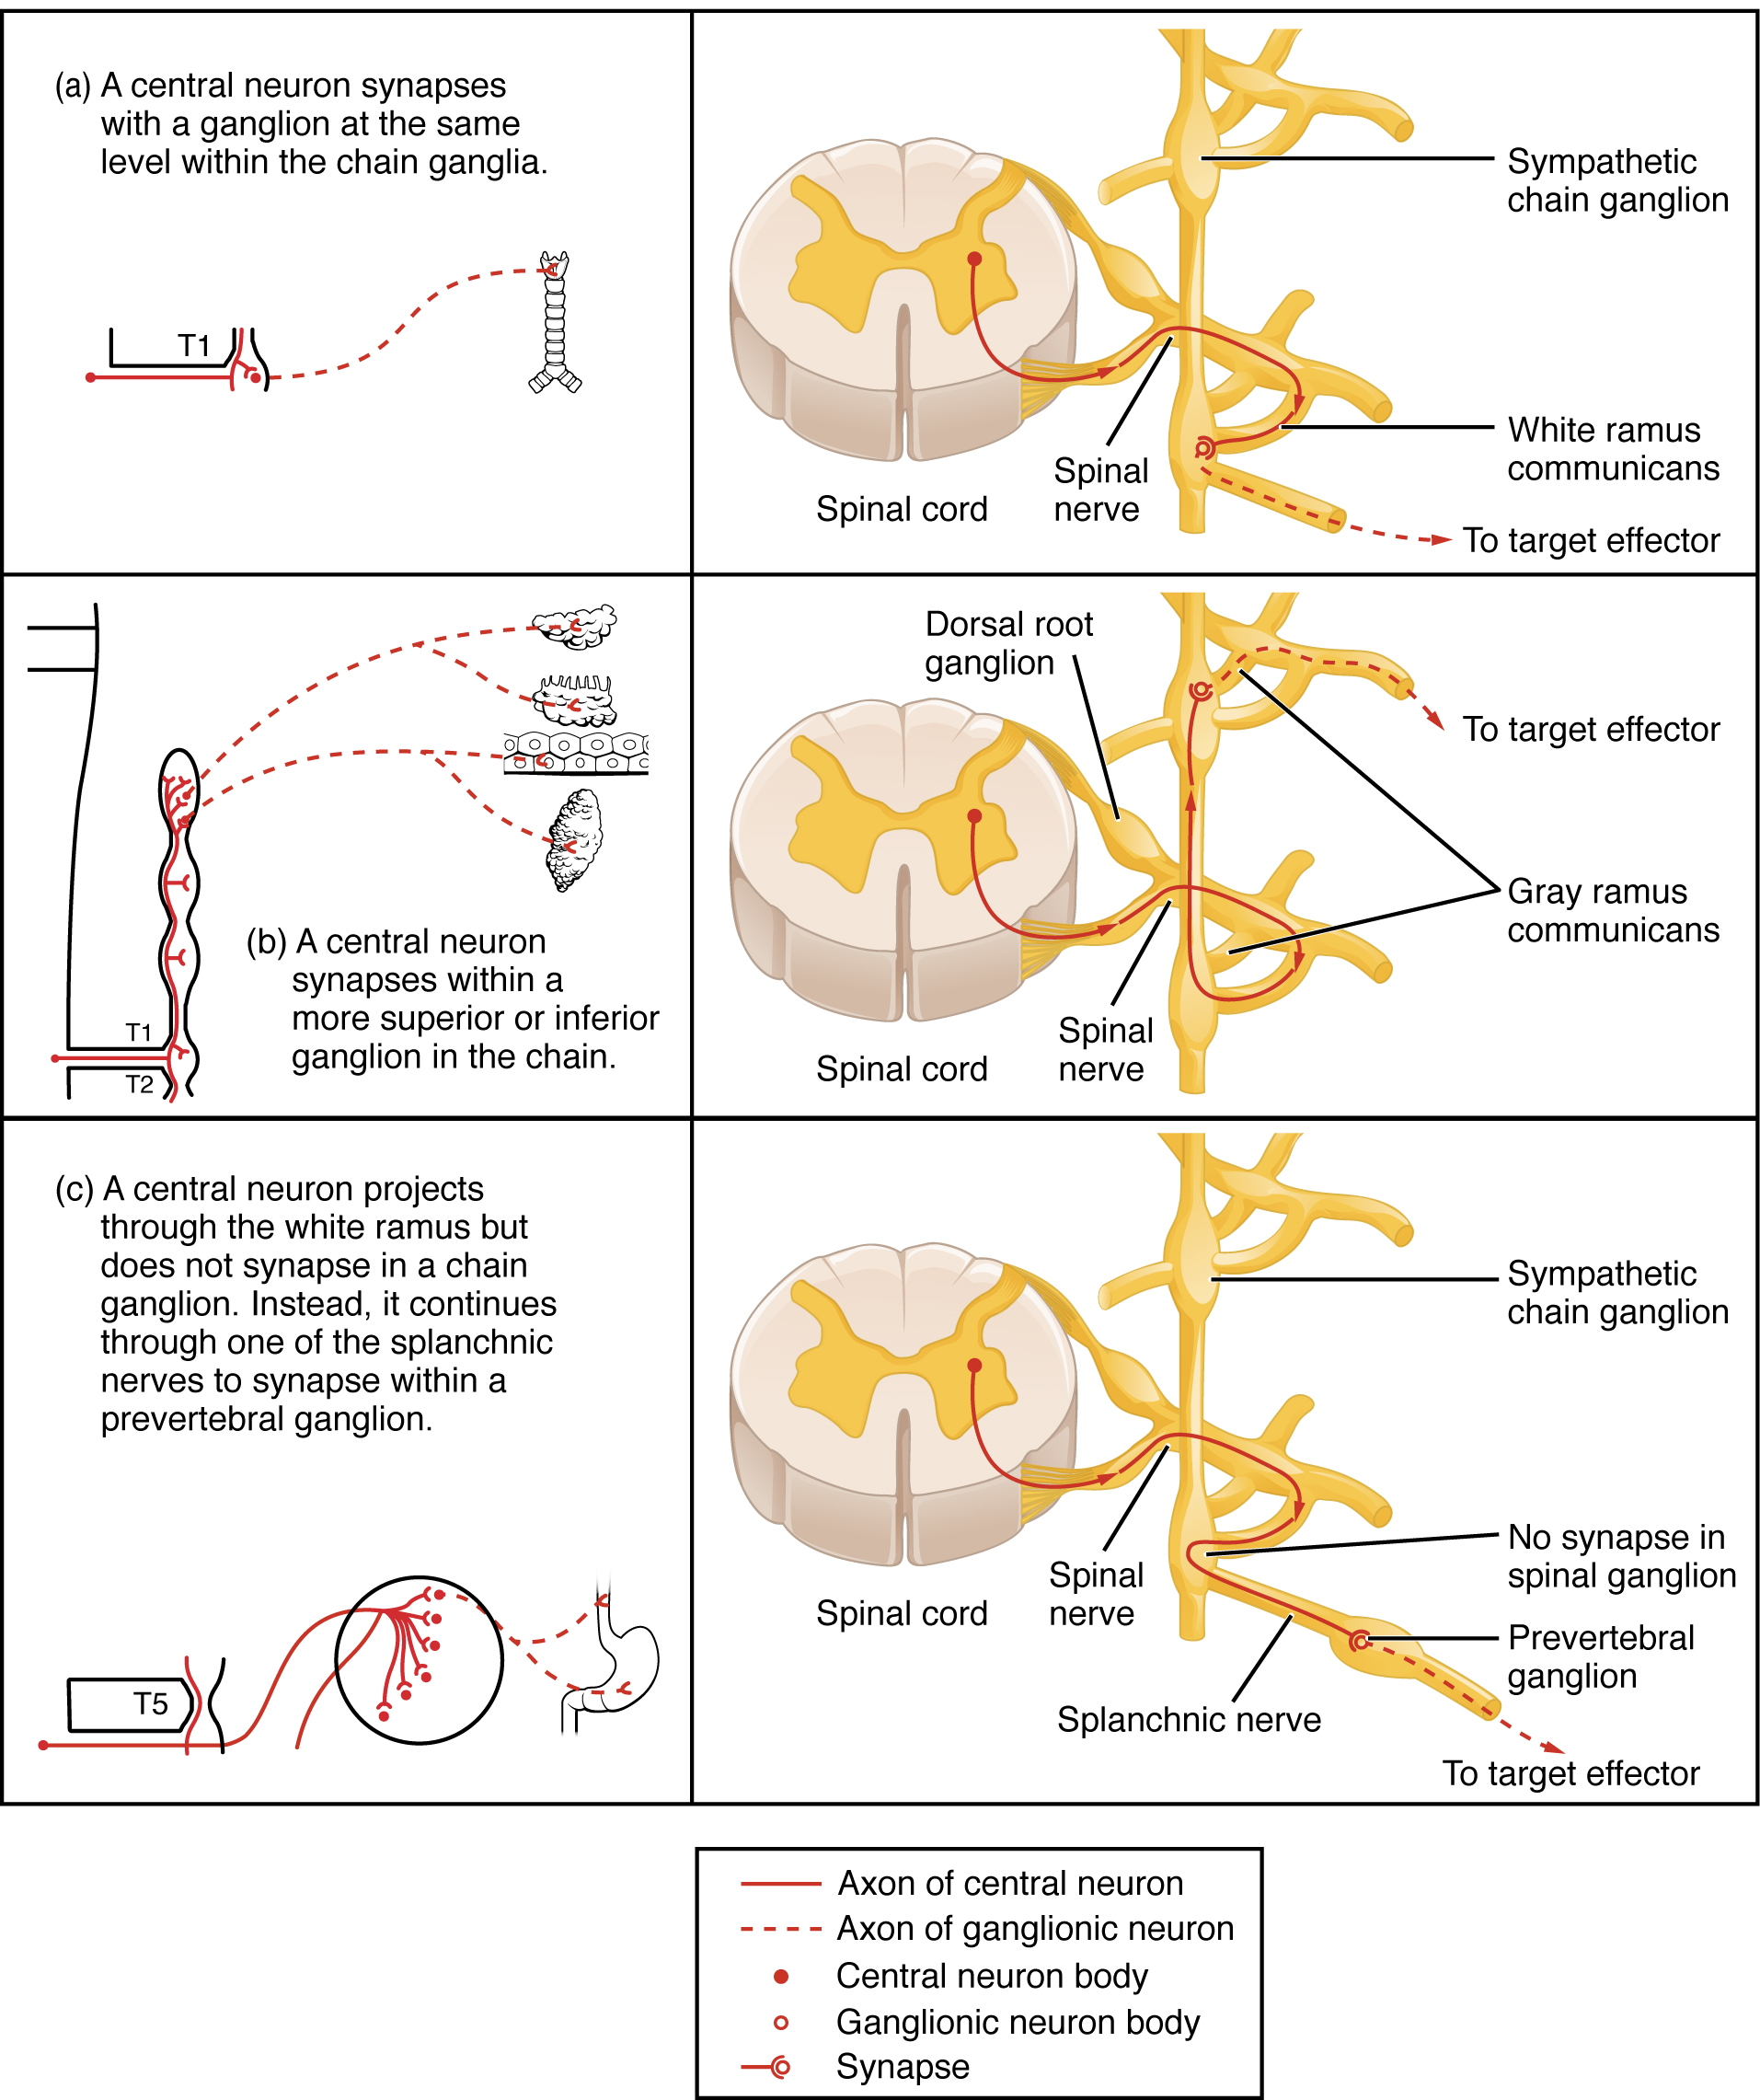 This table shows the connections between the spinal cord and the ganglia. The top panel shows the connection between a central neuron and a chain ganglion at the same lever. The center panel shows the connection between a central neuron and a synapse with a superior or inferior ganglion. The bottom panel shows the projection of a central neuron into the white ramus.